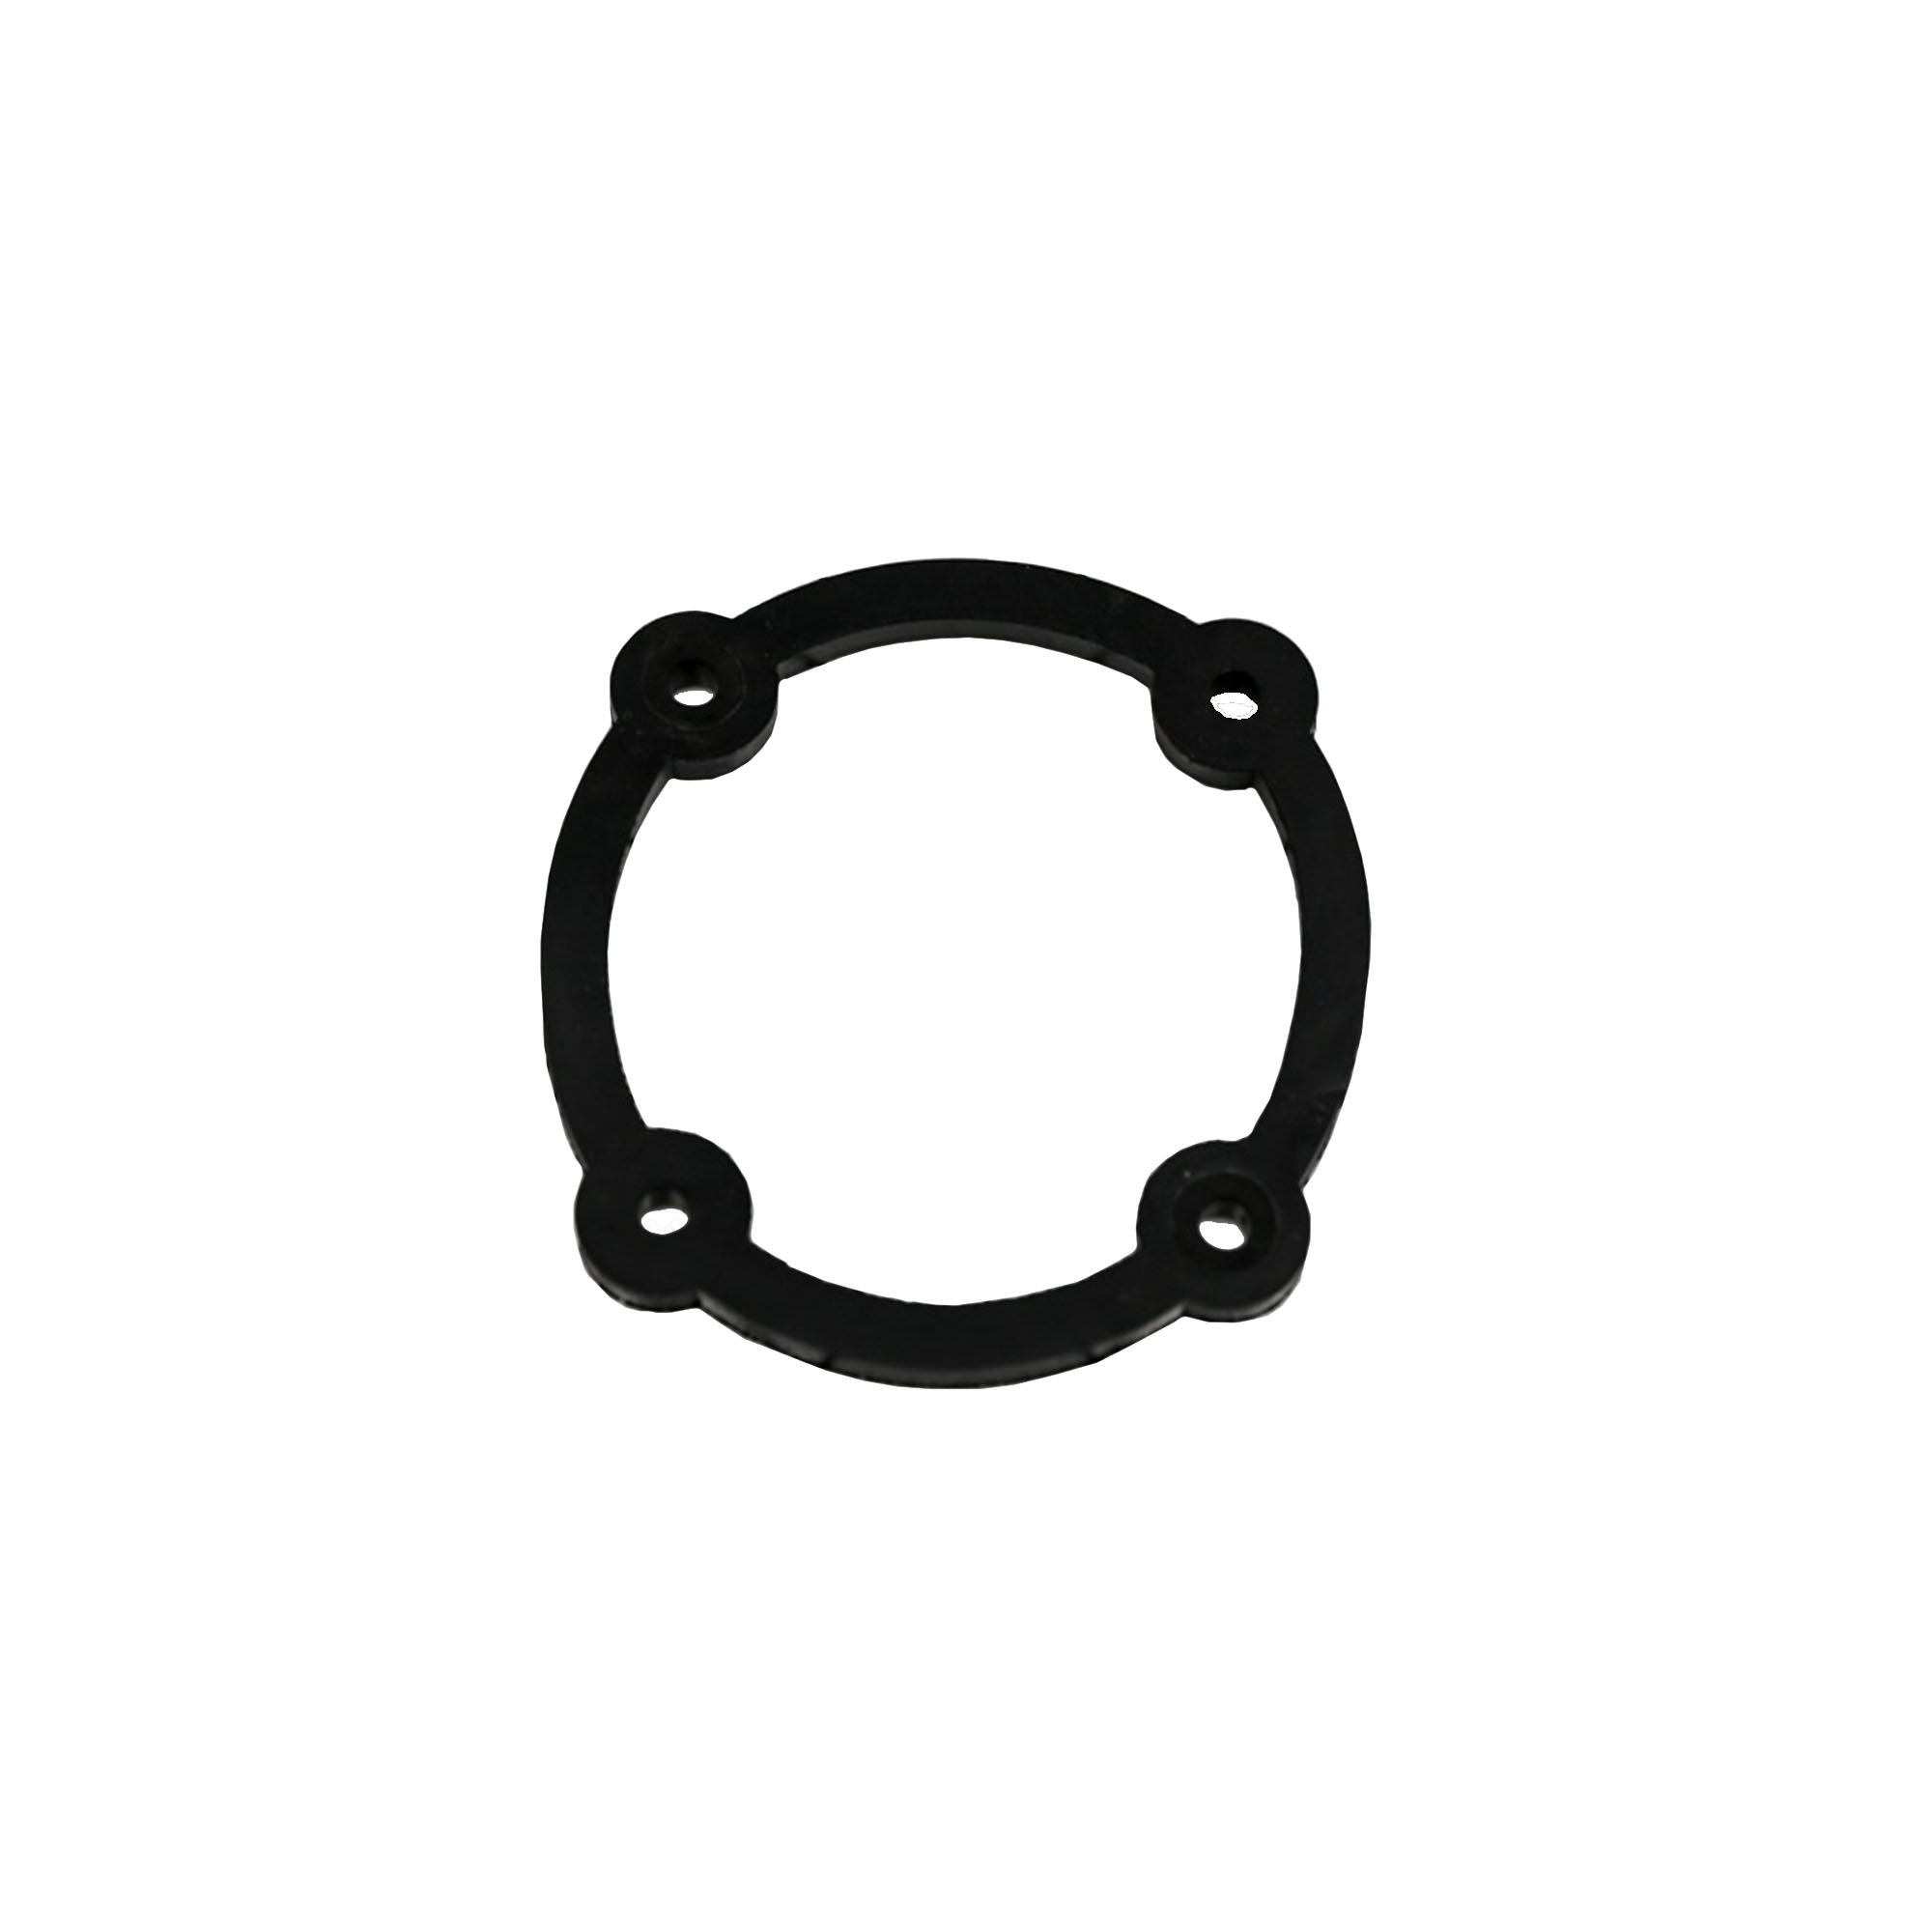 Cabinet Sandblaster Parts, Parts Washer Replacement Parts, Parts & Accessories, Rubber Gasket for 013 Blower Assembly, 5503 Rubber Gasket, American Hawk Industrial, Dee-Blast